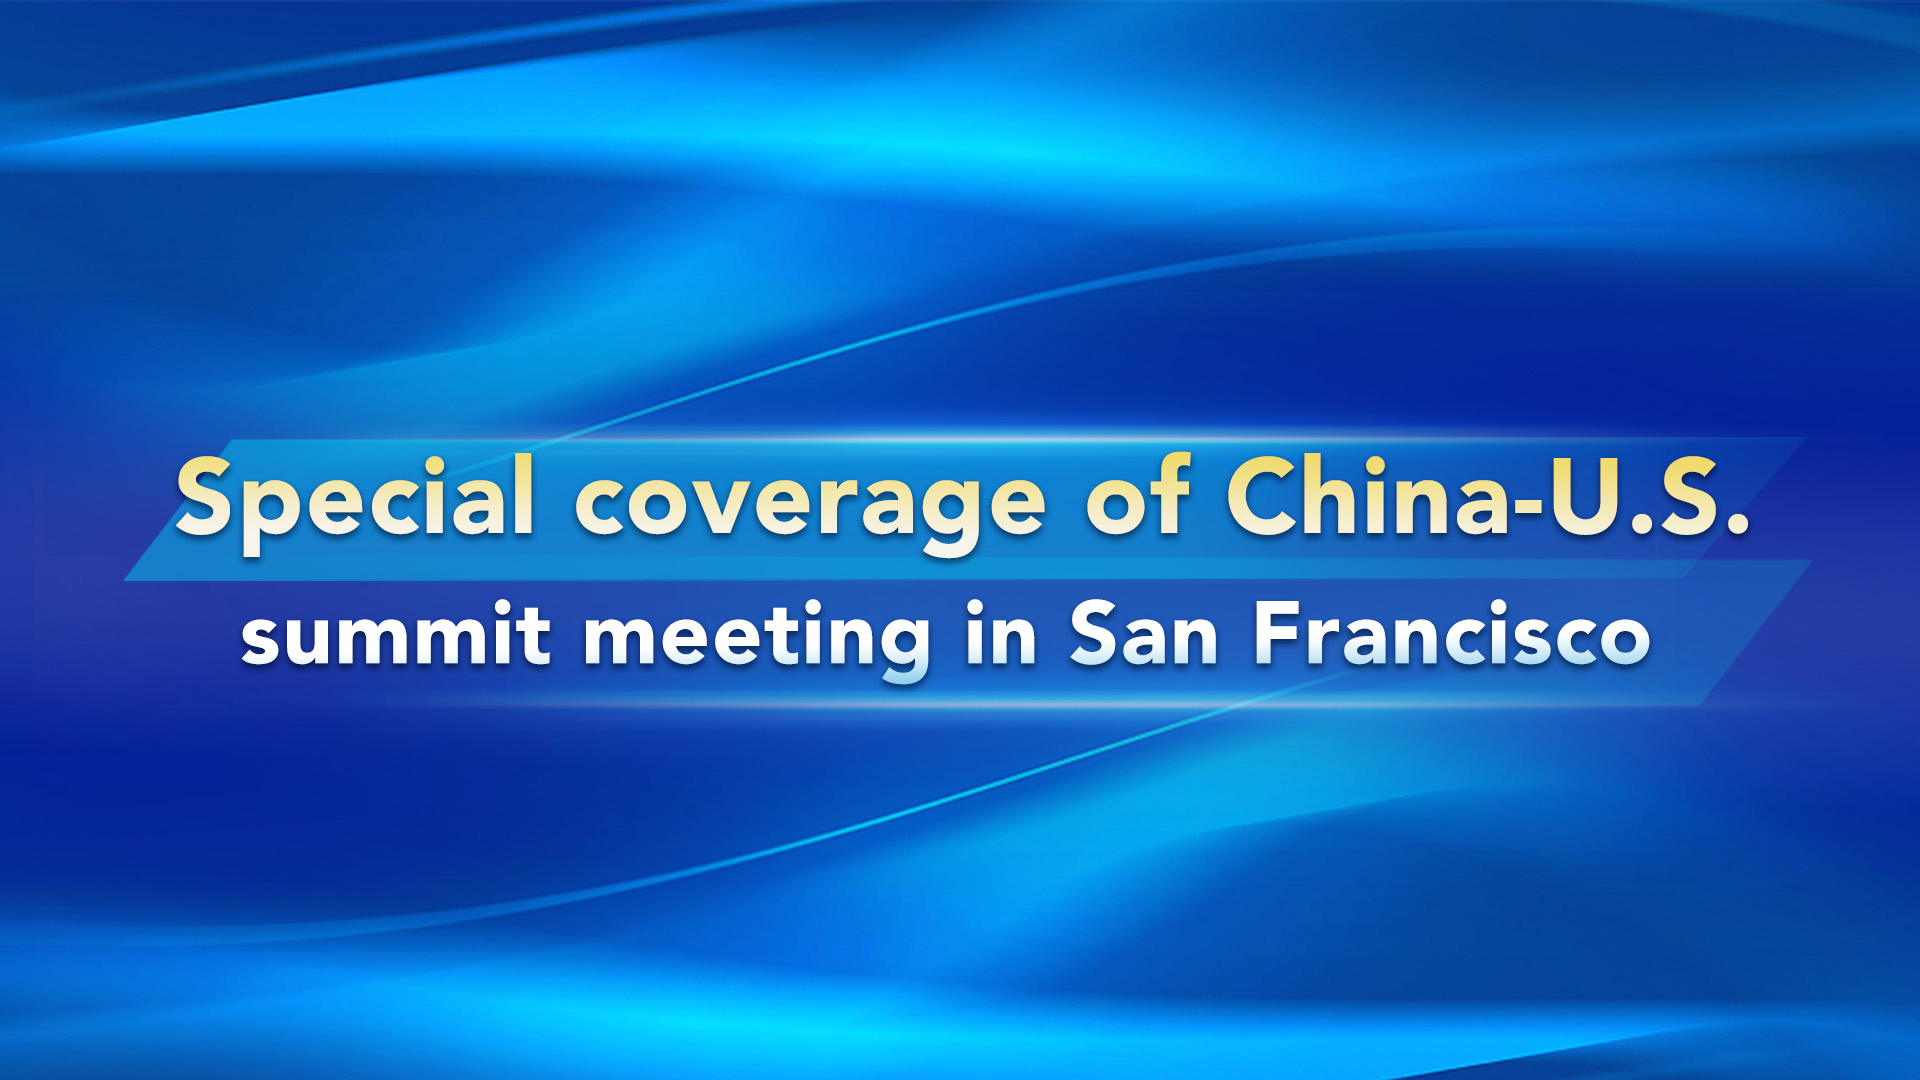 Live: Special coverage of China-U.S. summit meeting in San Francisco